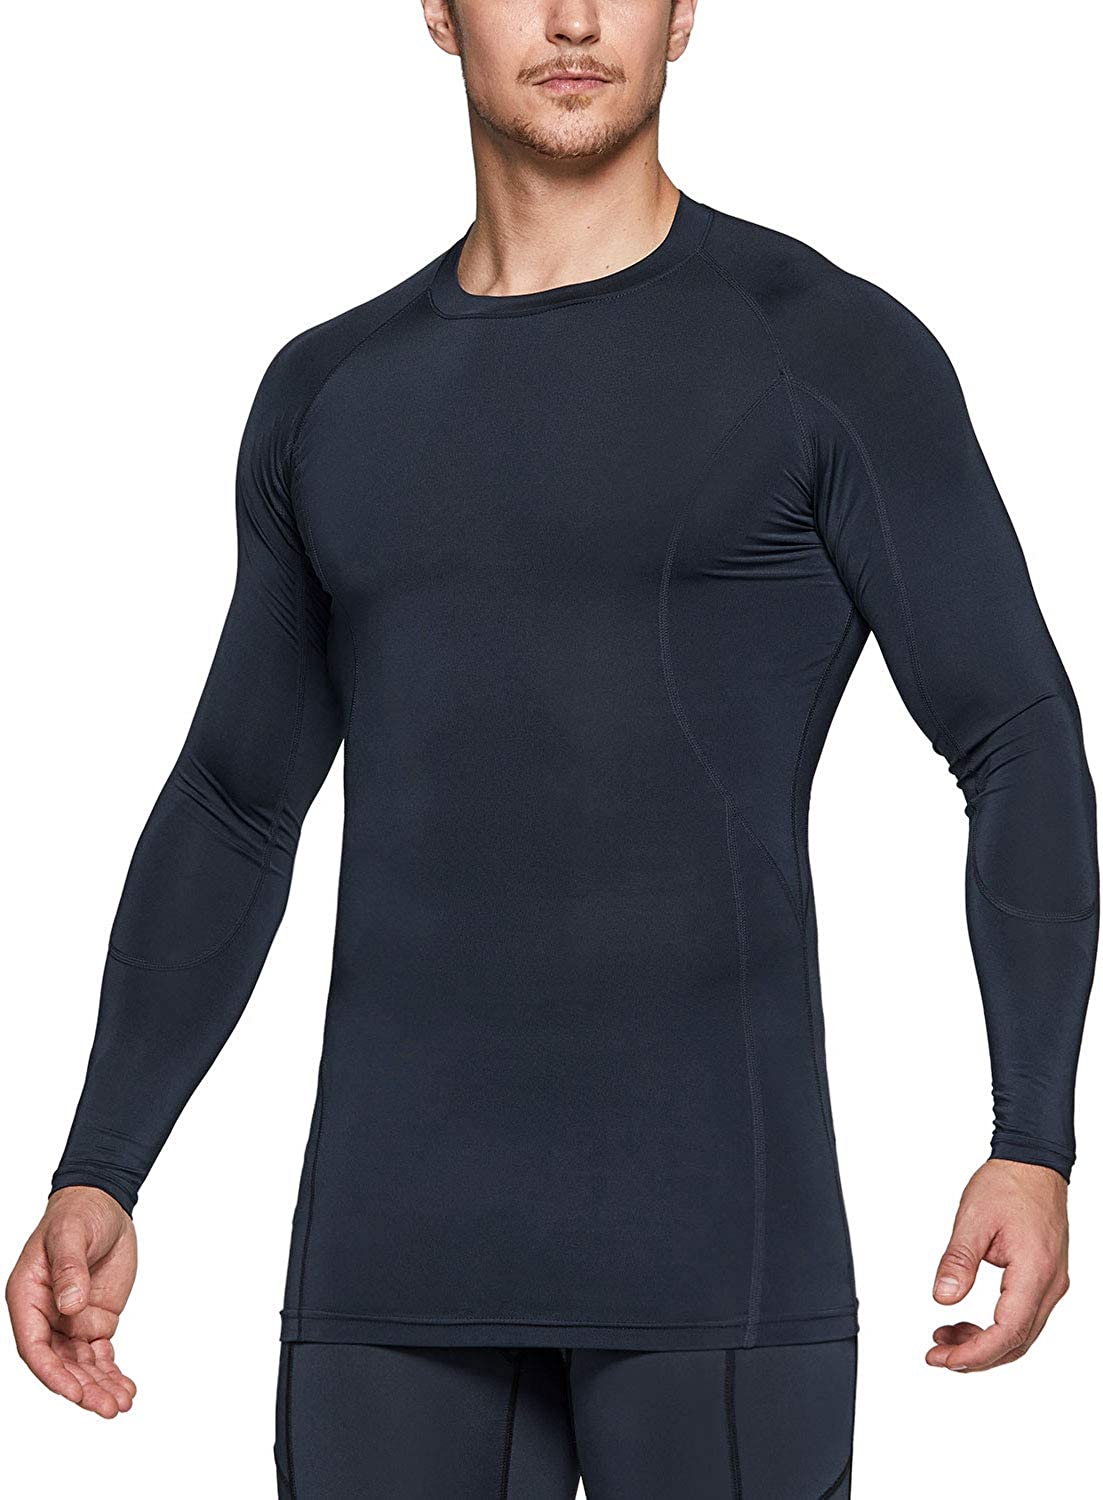 Cool Dry Athletic Workout Shirt Active Base Layer T-Shirts TSLA Men's Tactical V-Neck Long Sleeve Compression Shirts 